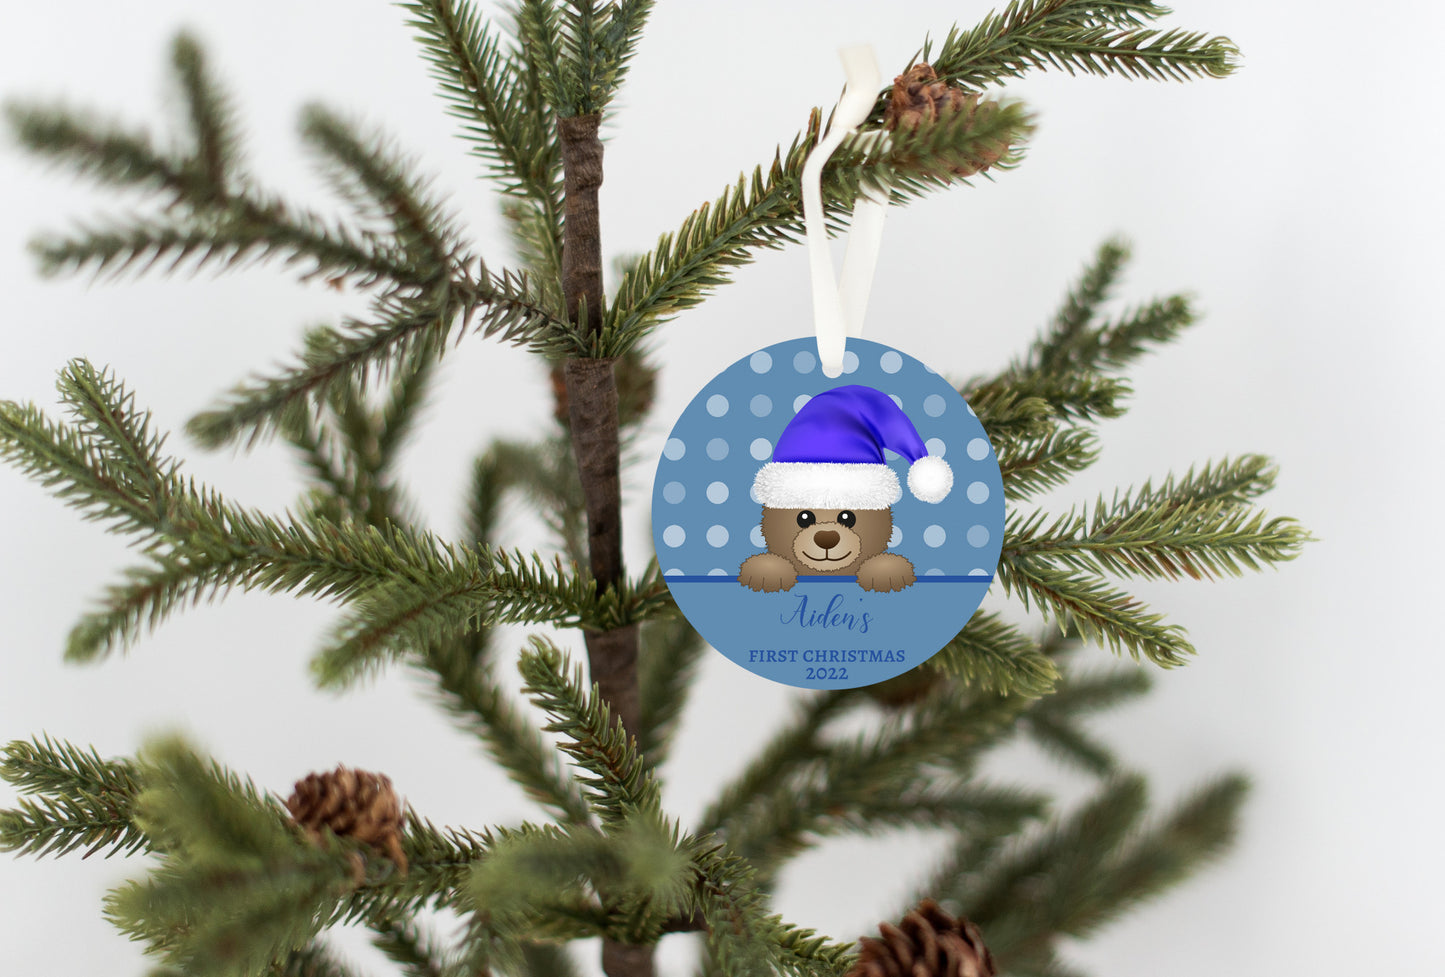 Baby's First Christmas Blue Bear Ornament